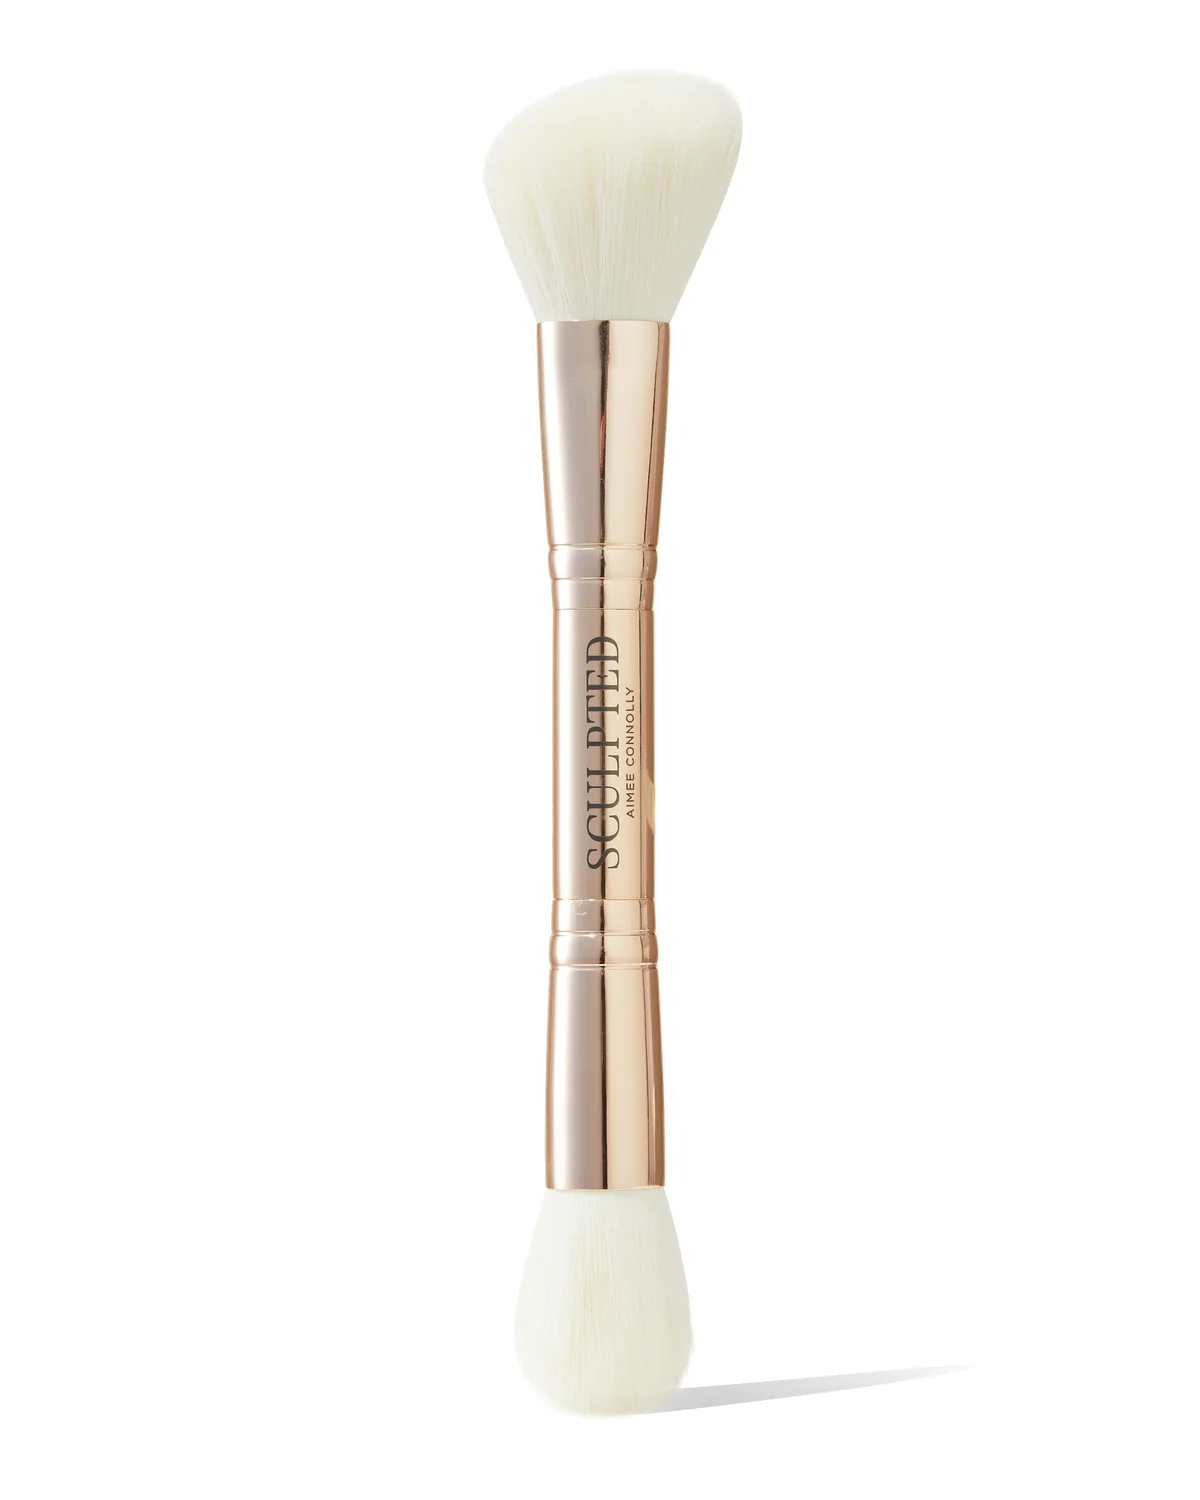 Sculpted By Aimee Connolly Powder Duo Brush